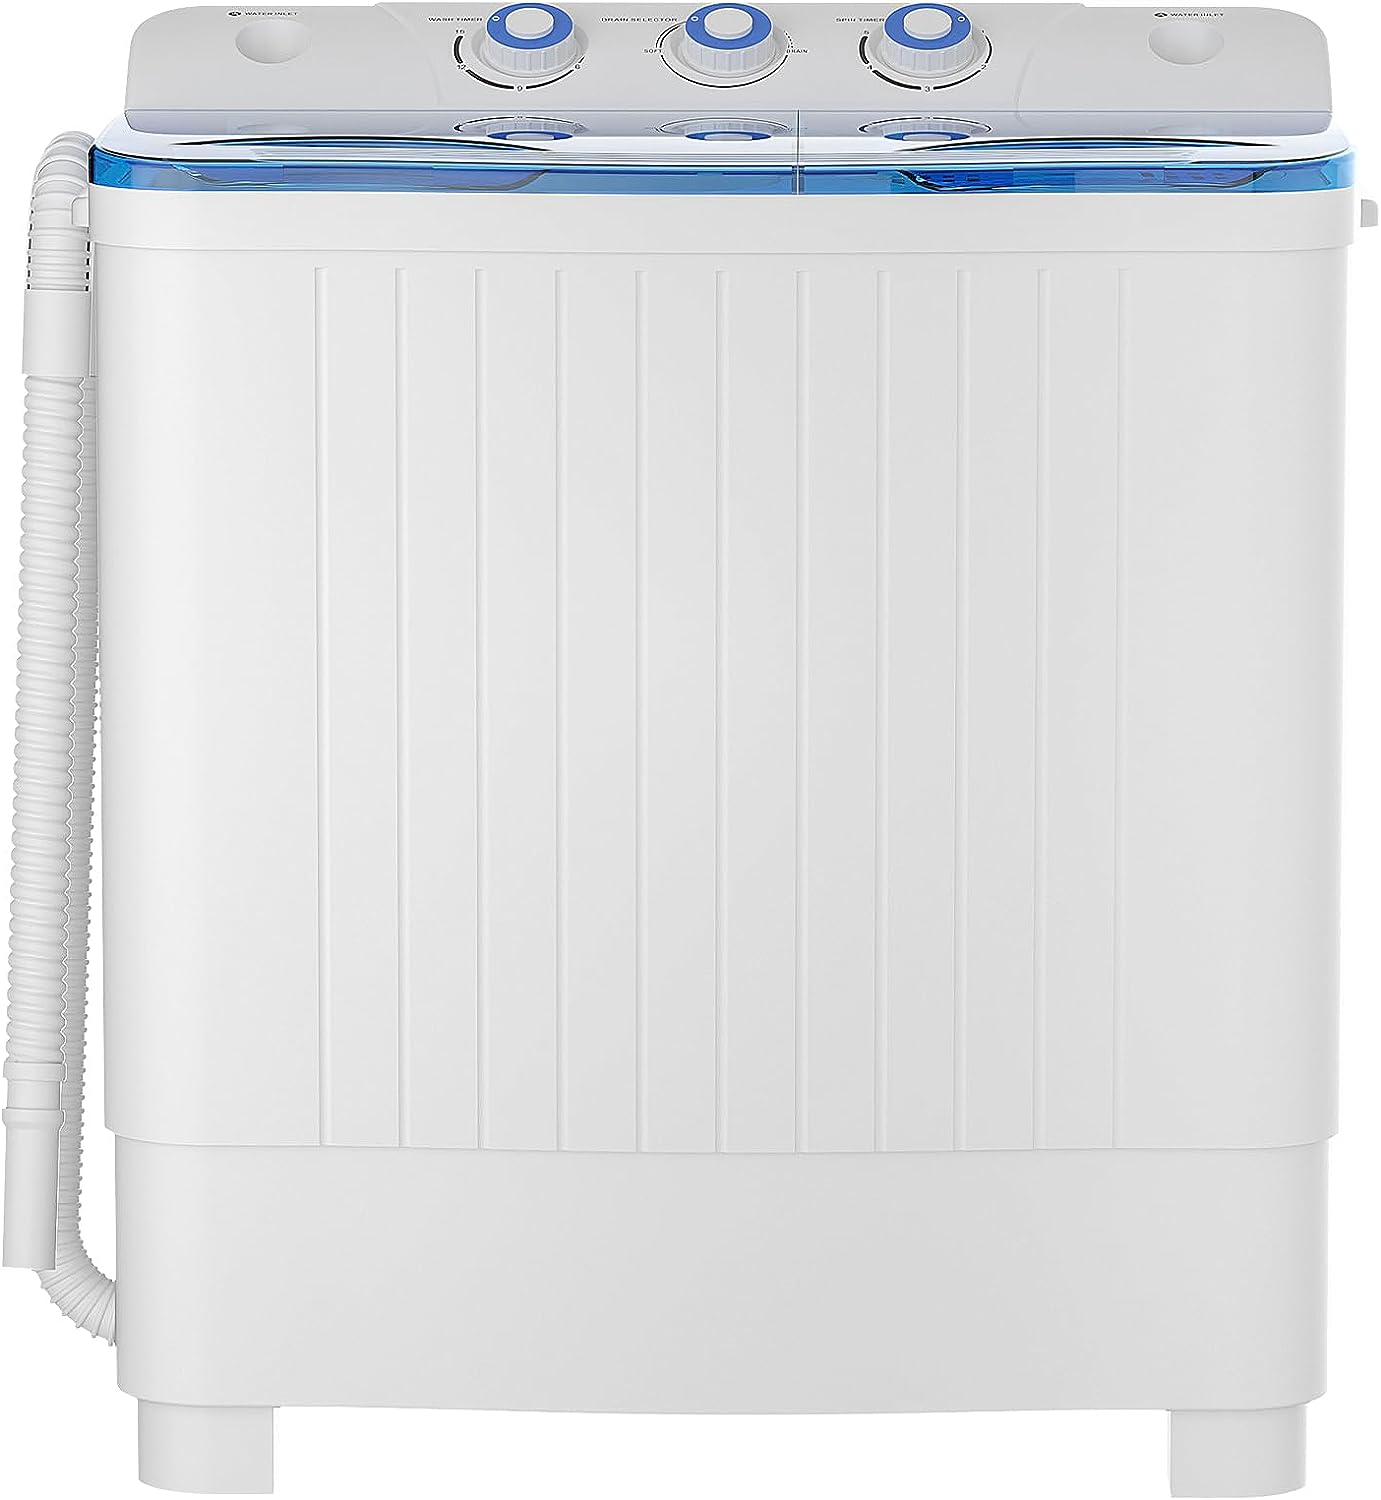 Auertech Portable Washing Machine 20lbs Mini Twin Tub Compact Semi-Automatic Washer Spinner Combo with Gravity Drain, Size: Dimension: 24.5 Large x